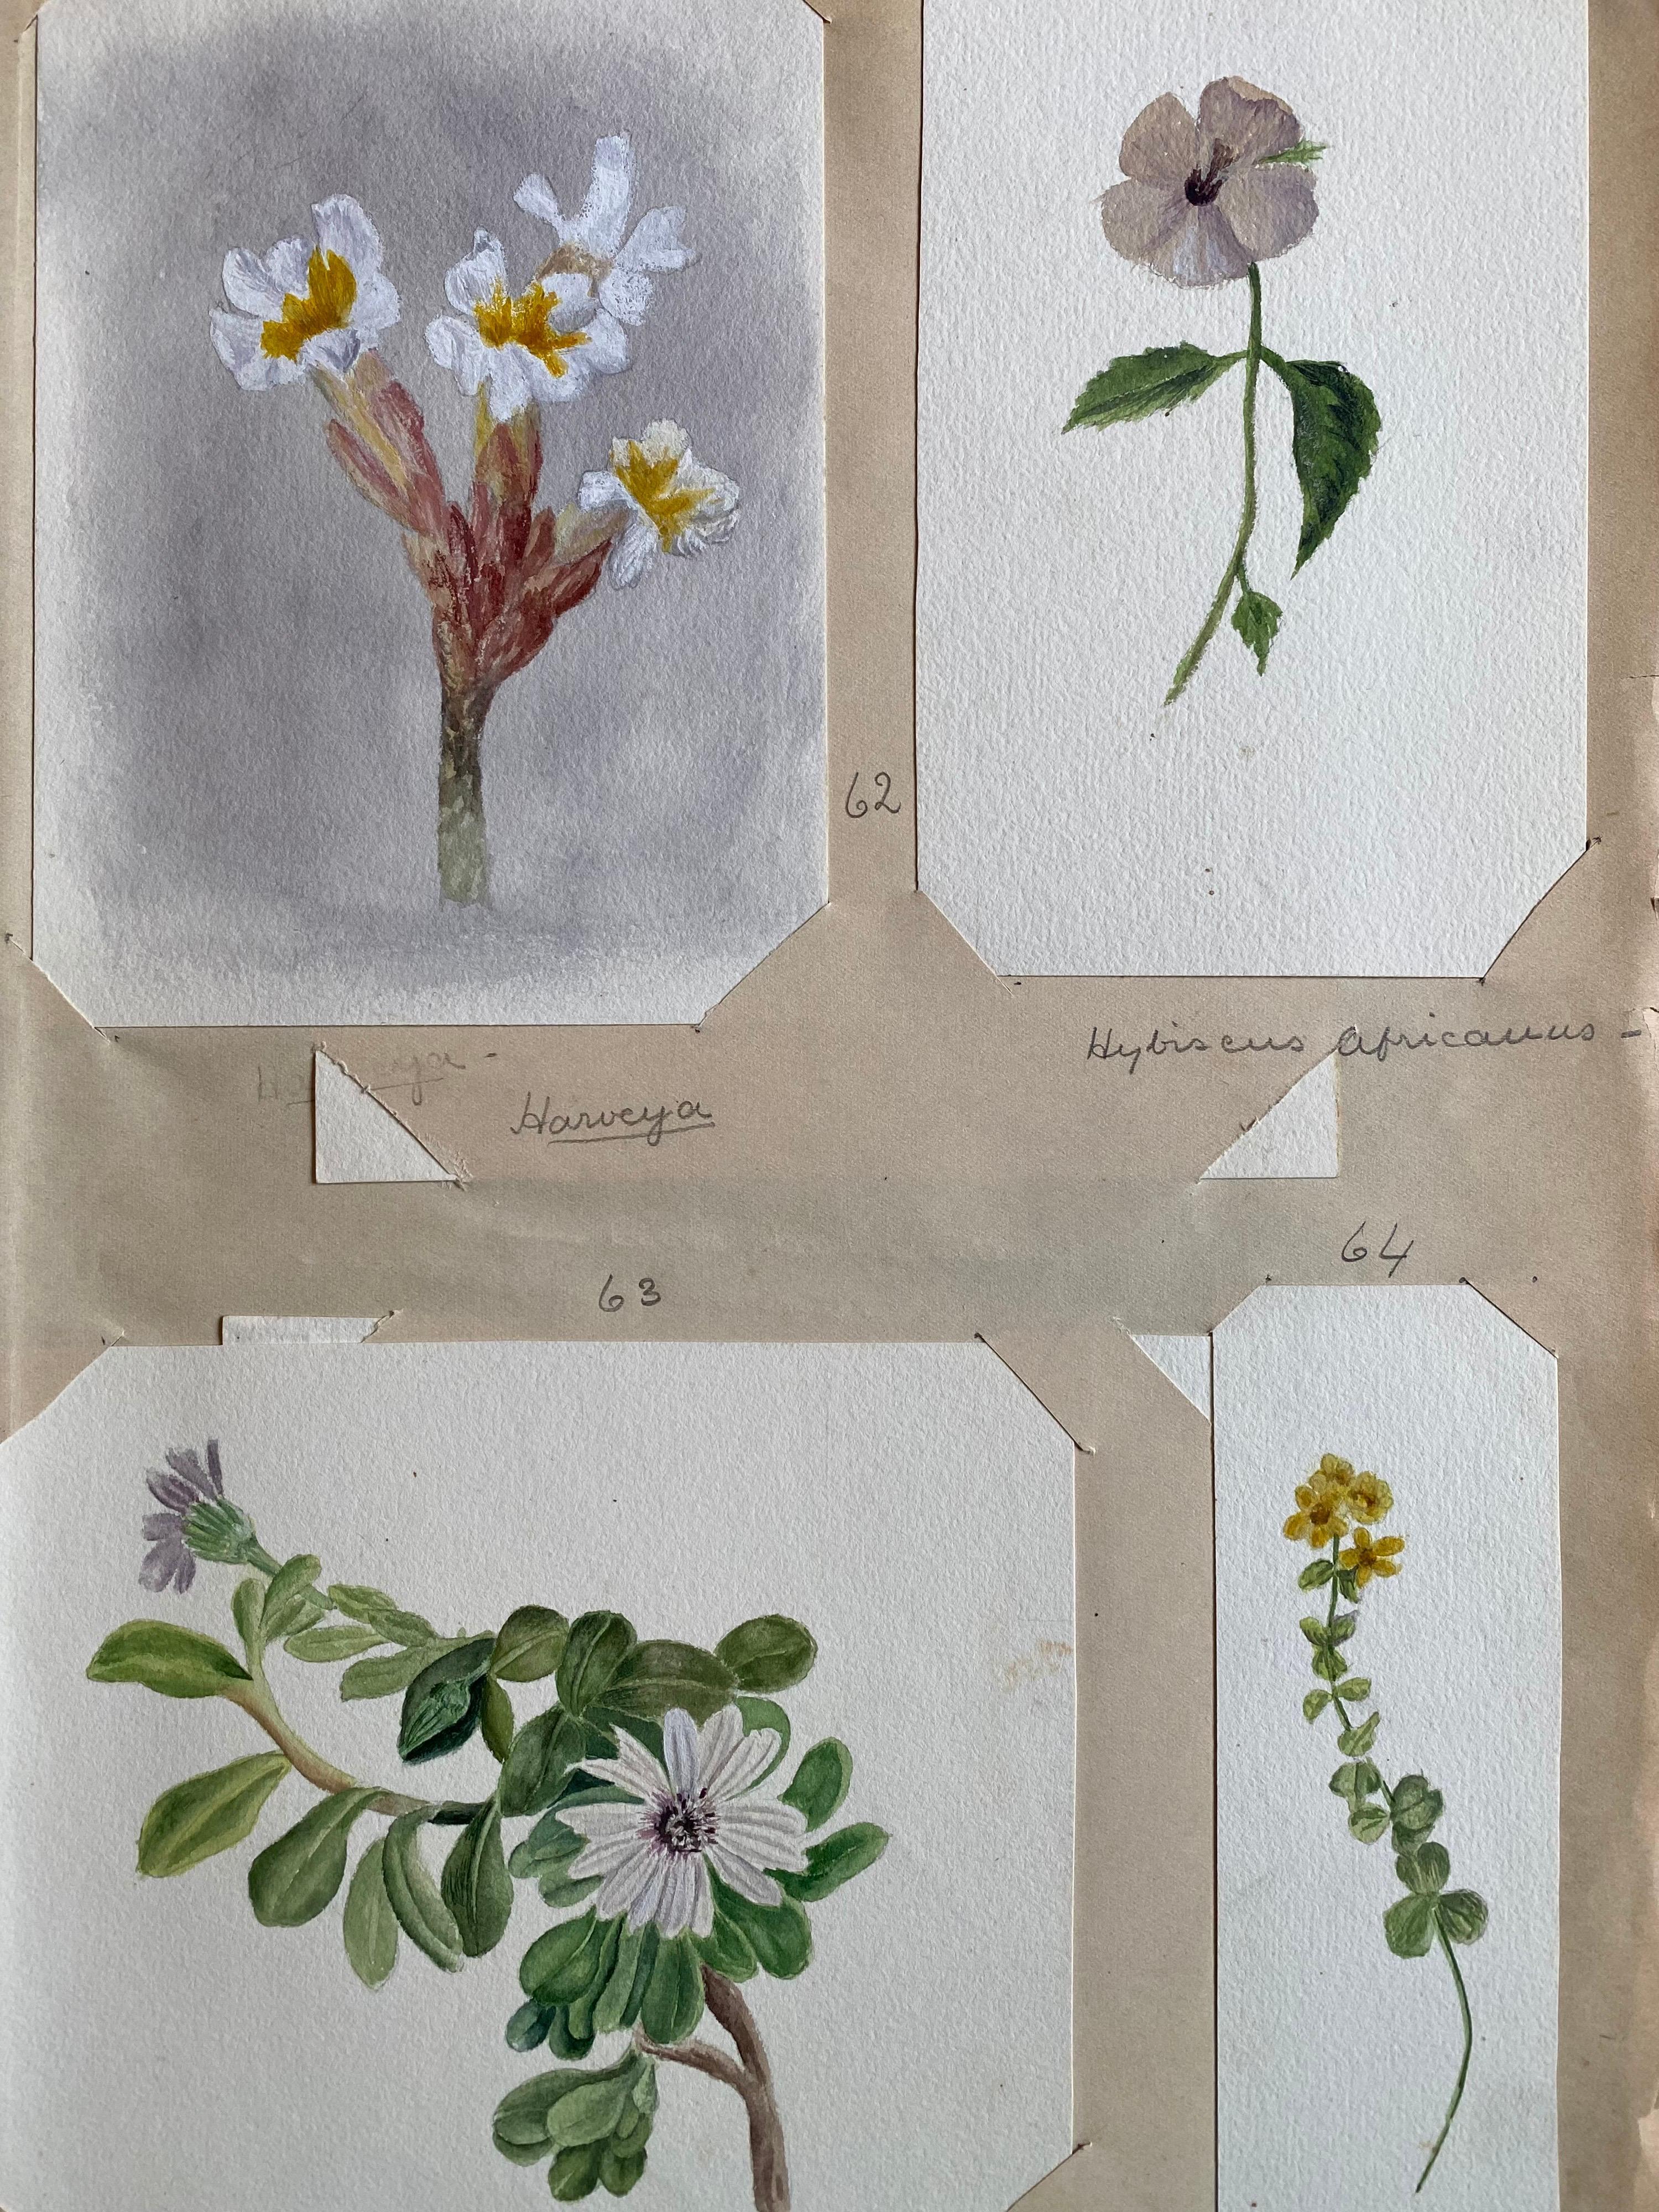 Set of four very fine original antique English botanical watercolour paintings depicting this beautiful depiction of a flower/ plant. The work came to us from a private collection in Surrey, England and had been part of an album of works assembled